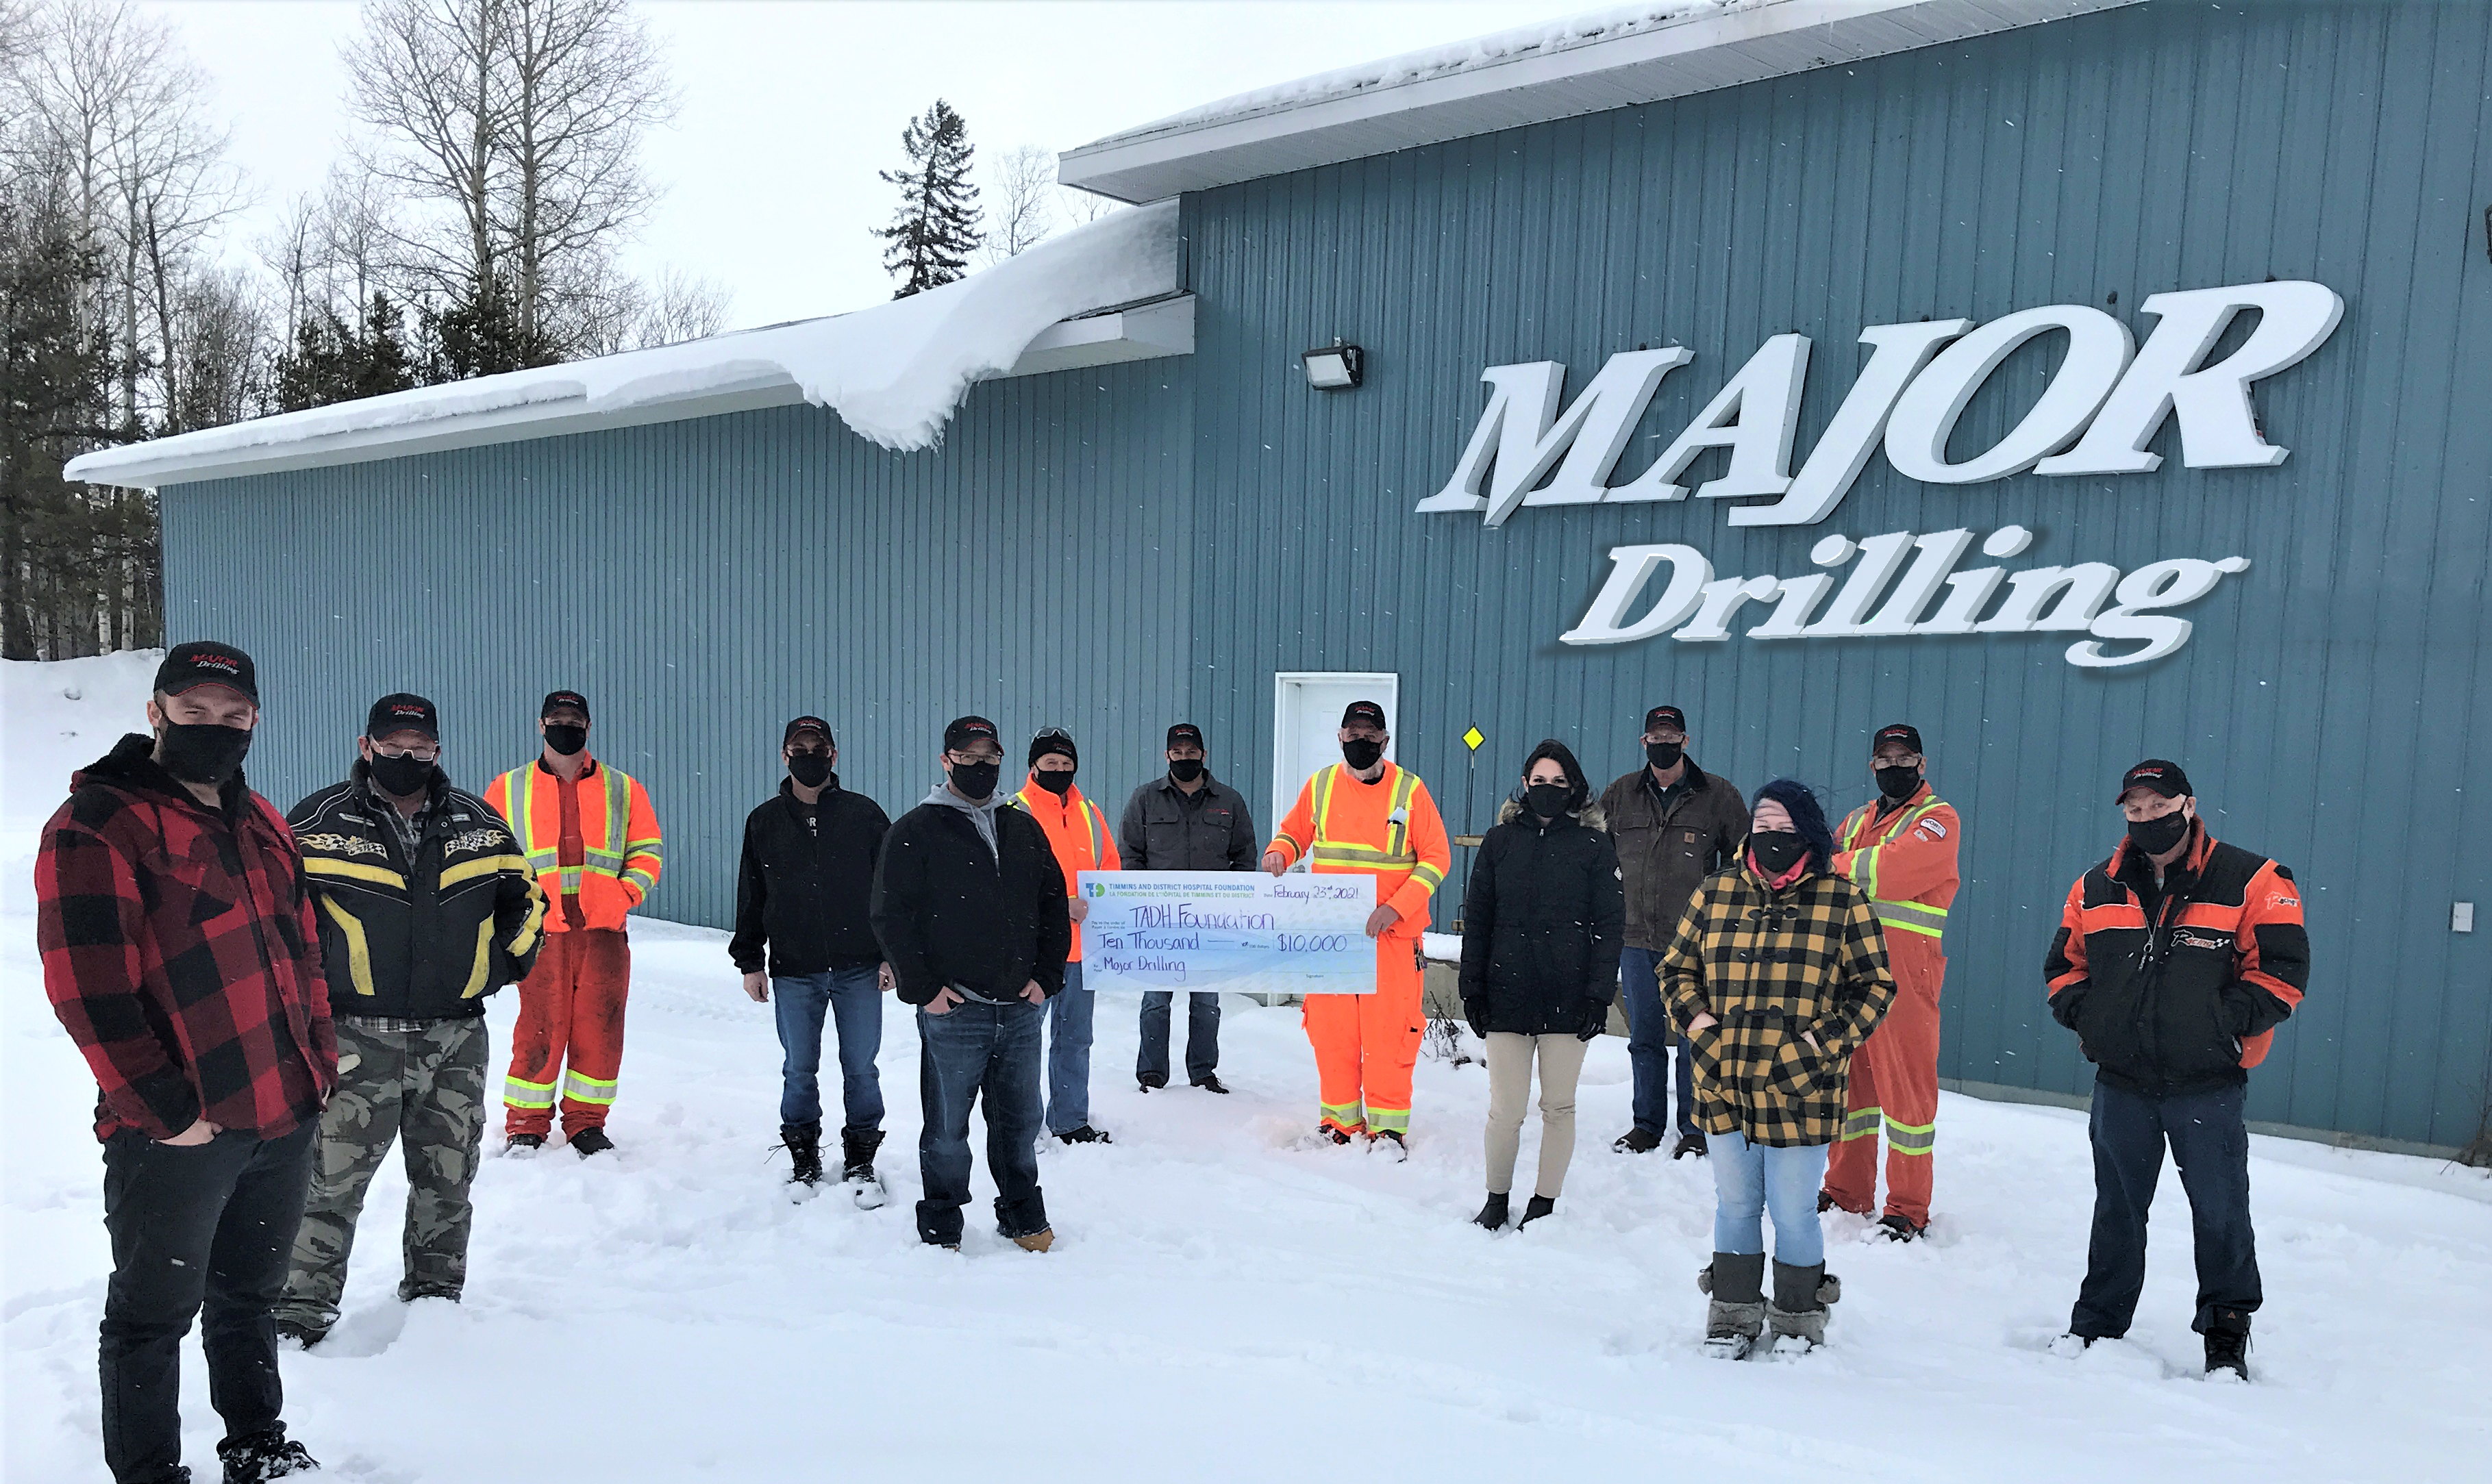 Major Drilling Canada - Timmins and District Hospital Foundation Donation